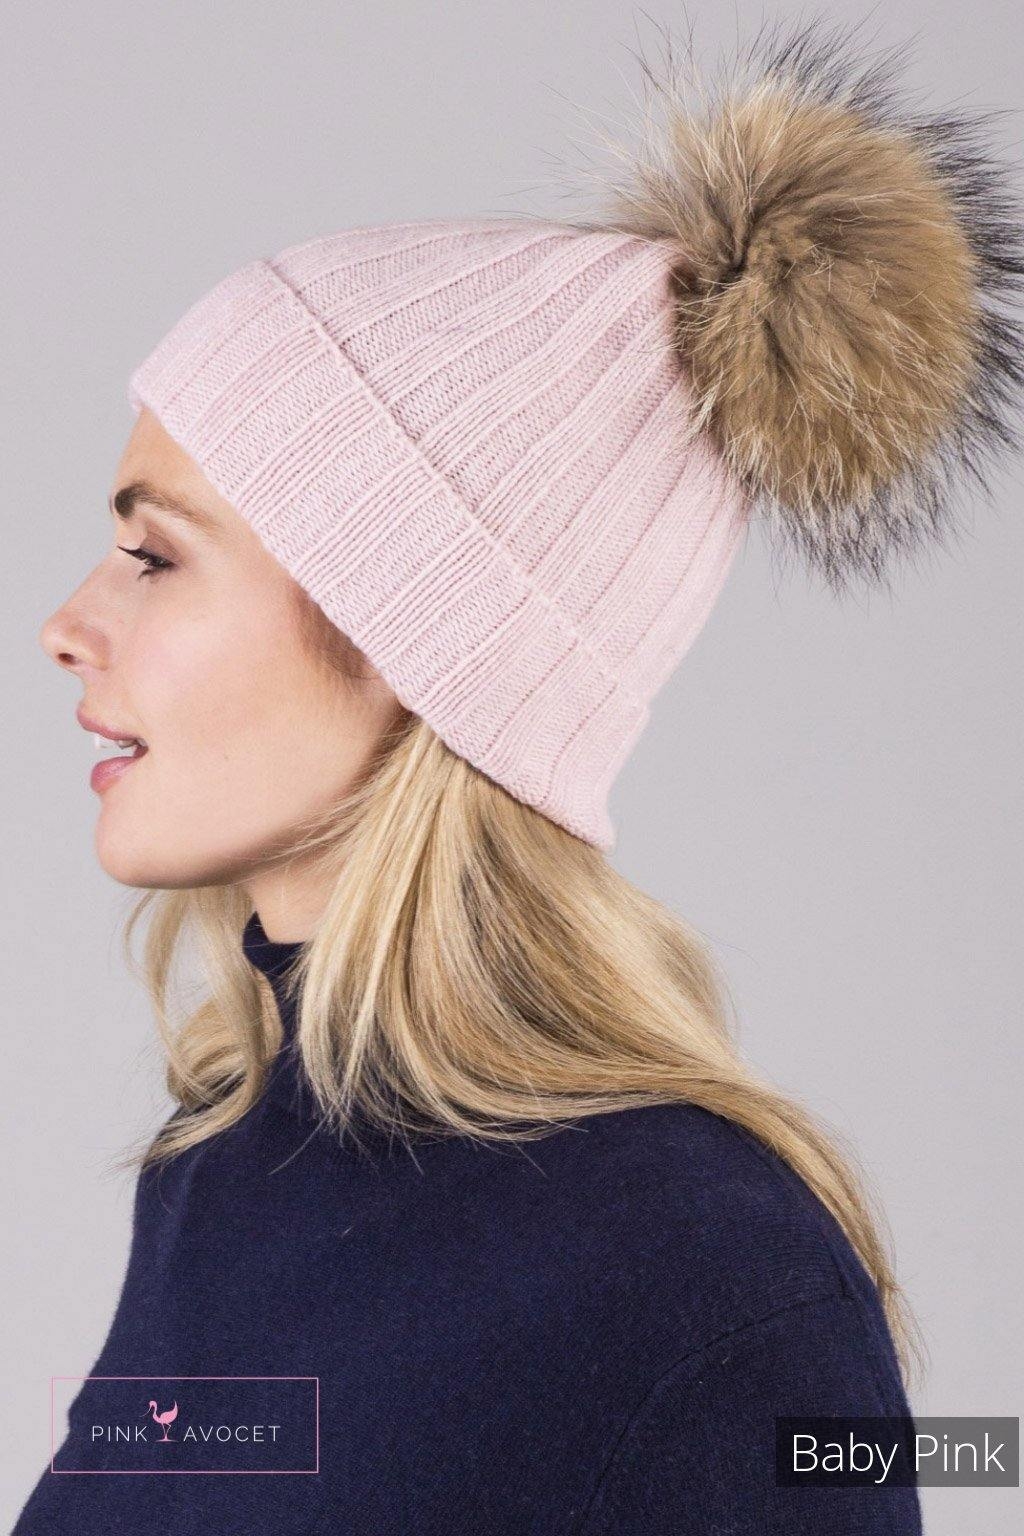 Cashmere Pompom Beanie Hat Baby Pink / OSFA by Pink Avocet